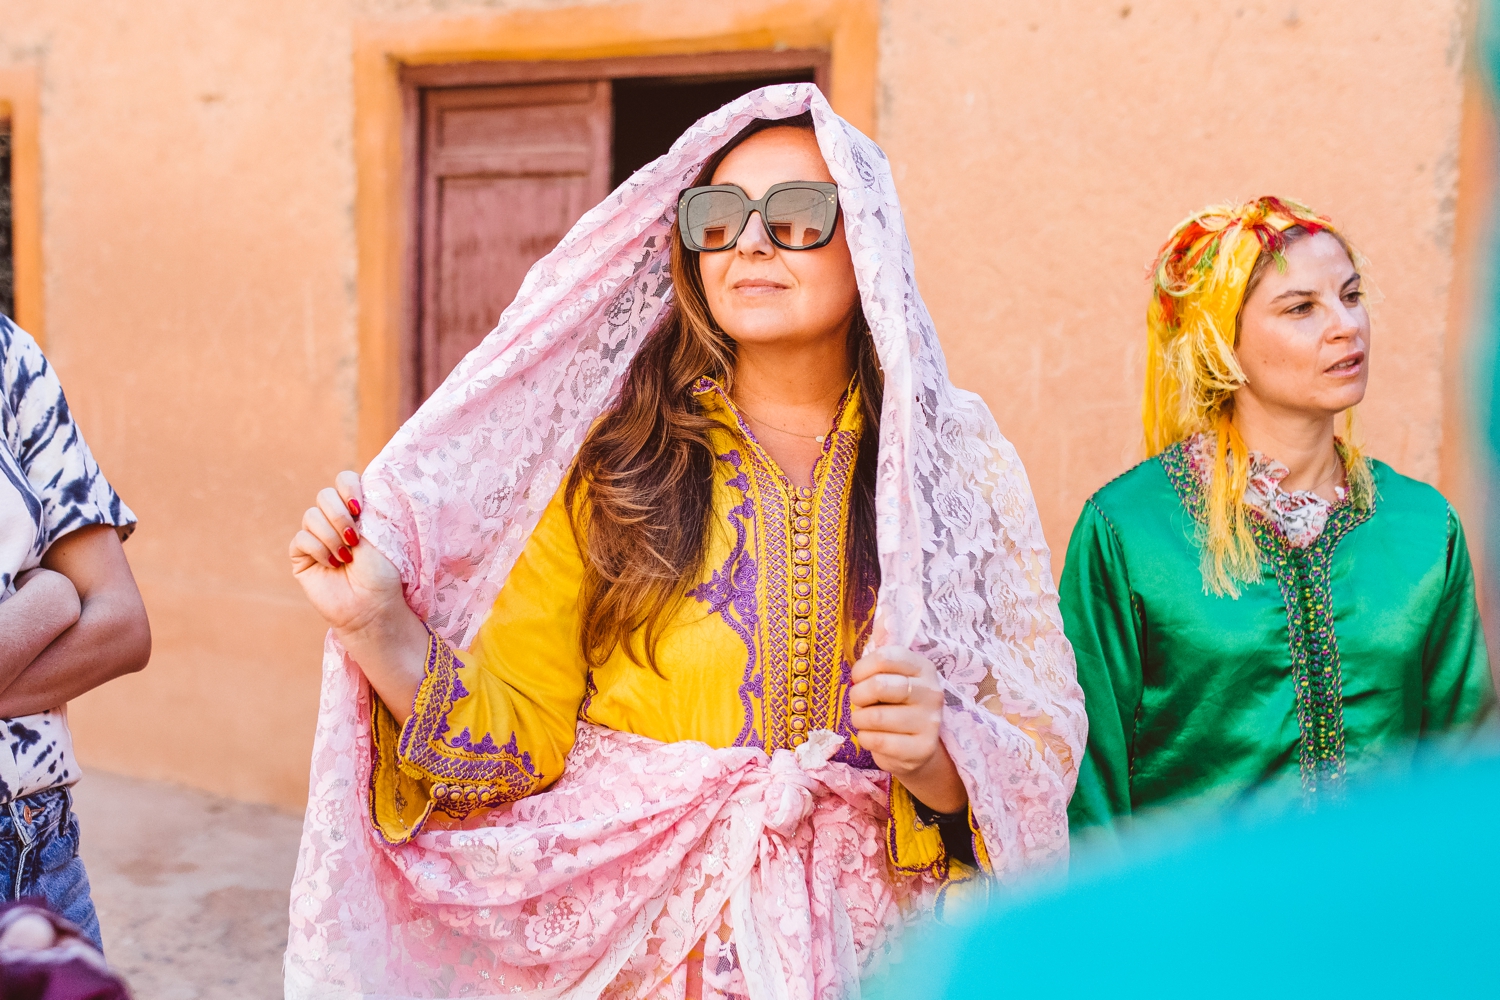 Woman wearing yellow Moroccan outfit with pink lace head covering in Marrakesh, Morocco | Brooke Michelle Photography